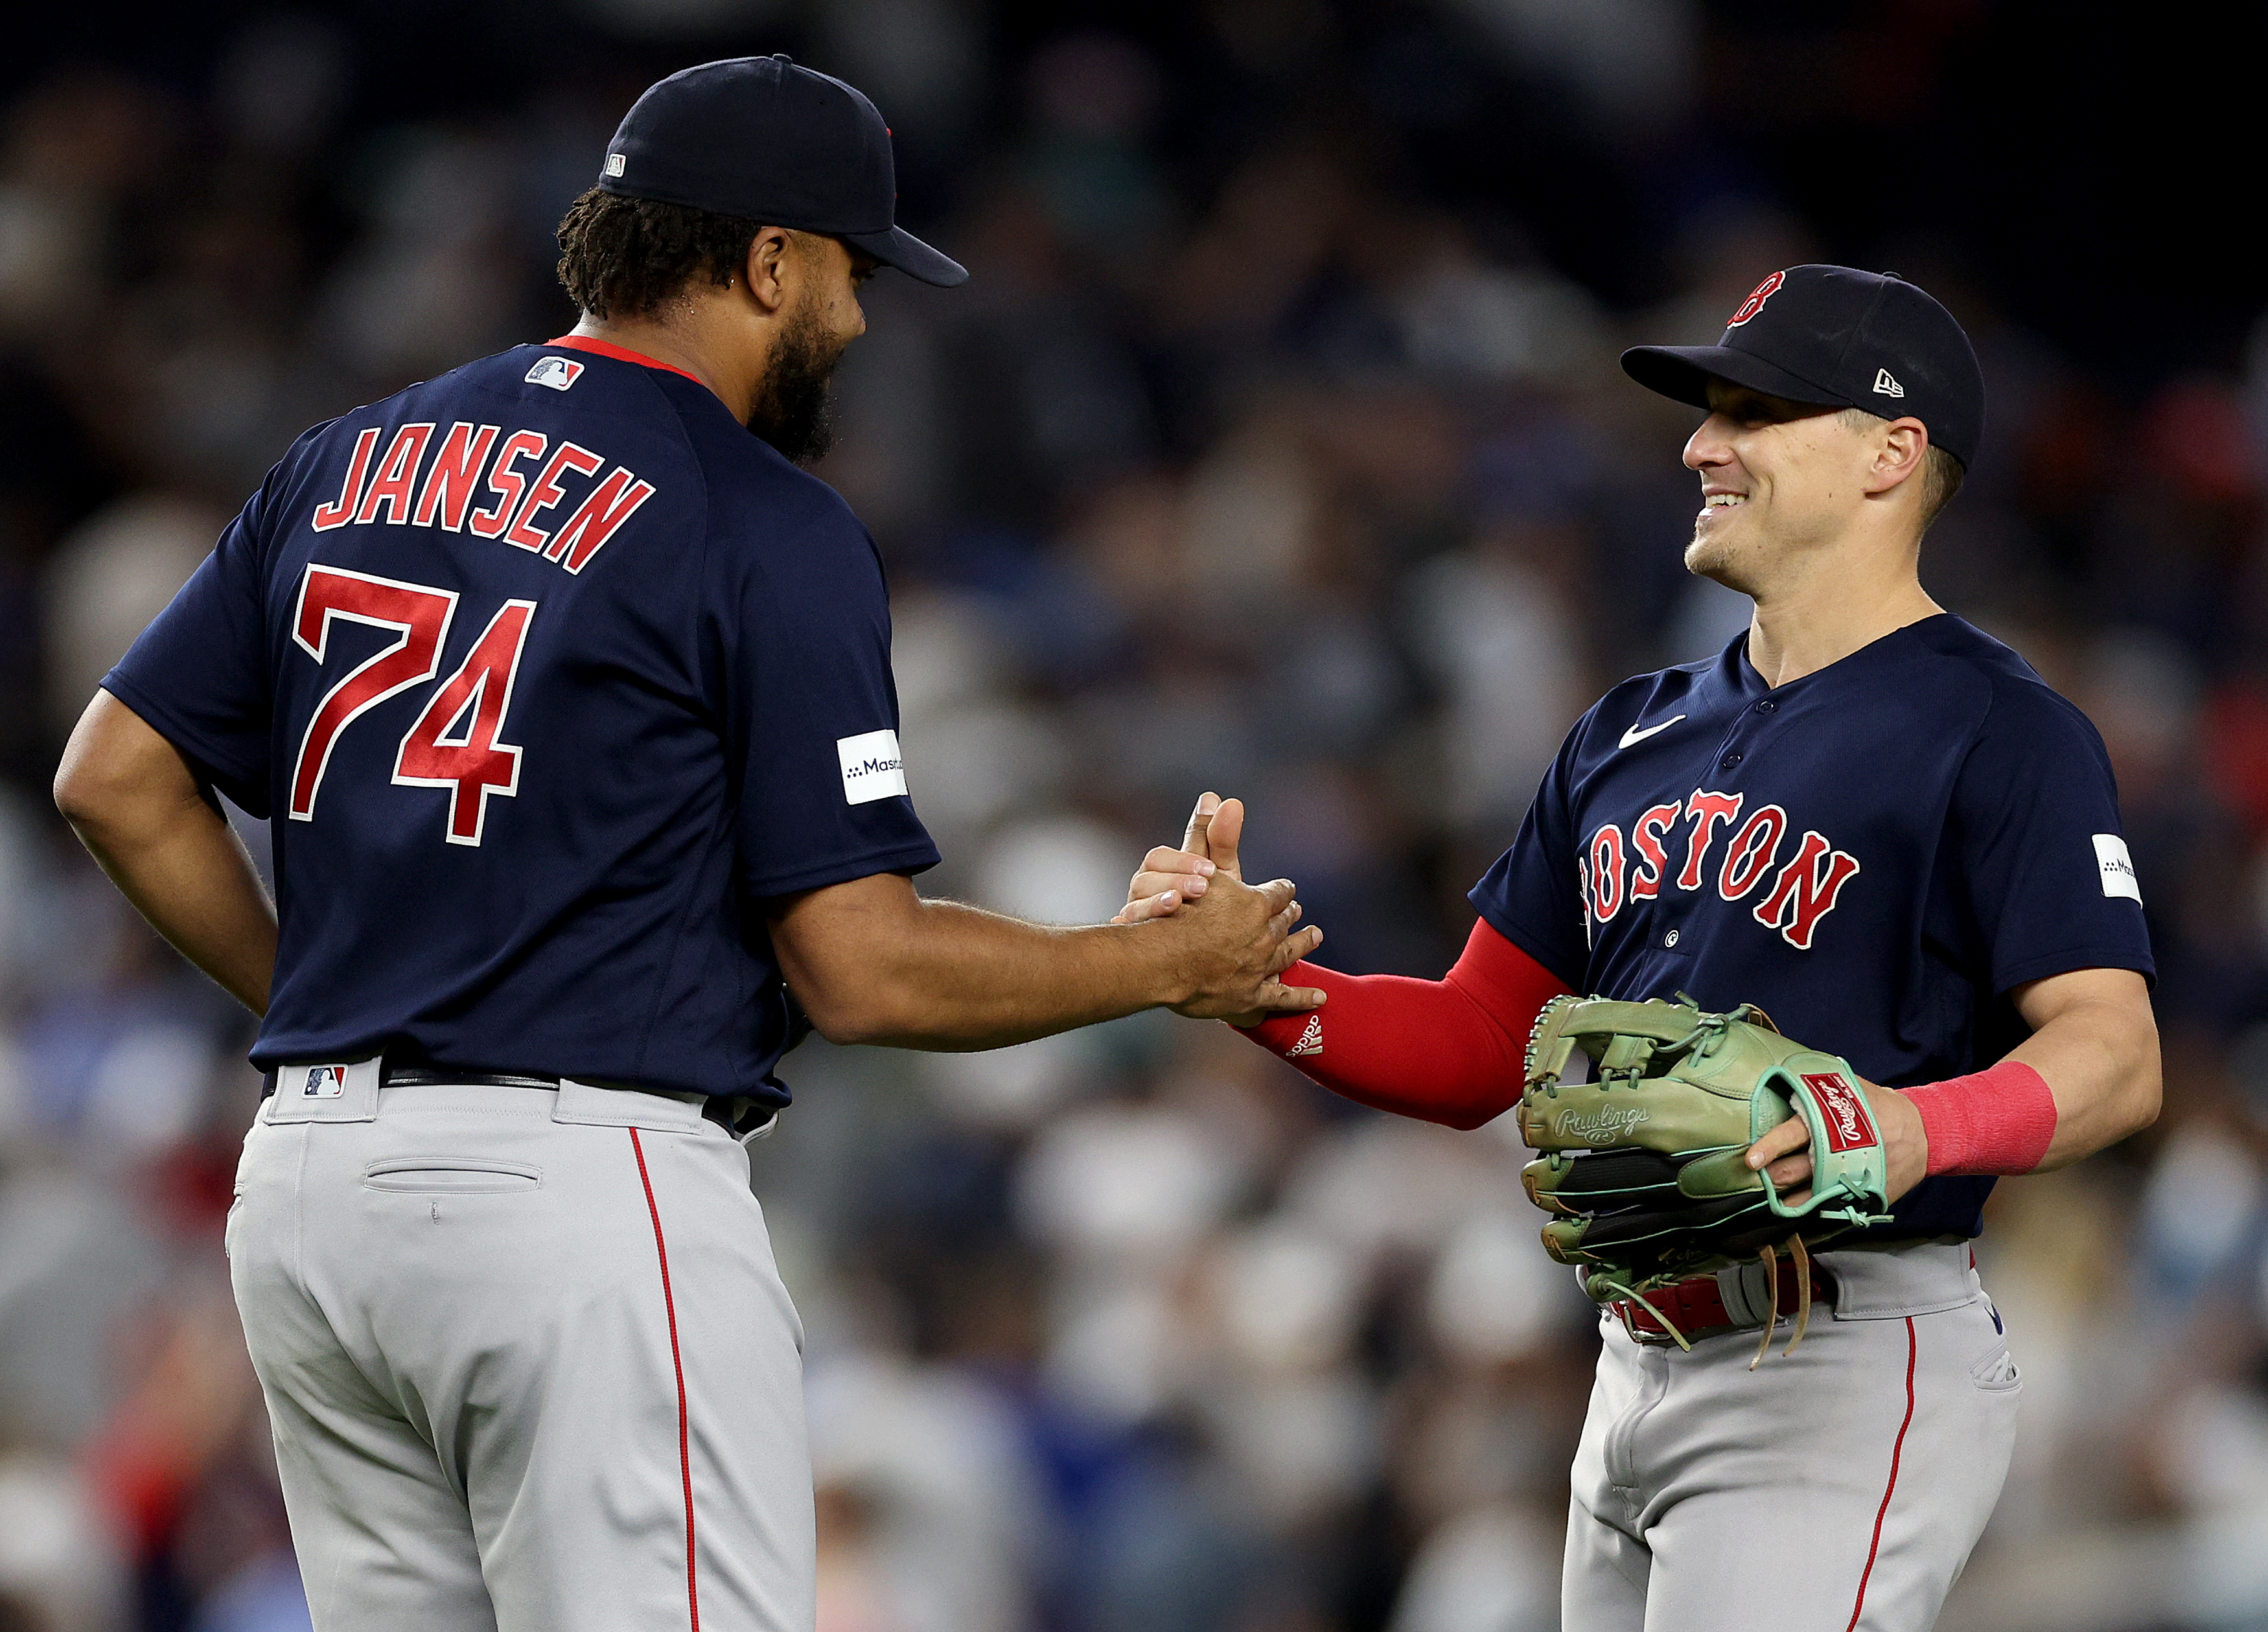 It doesn't matter where they are in the standings, Red Sox-Yankees